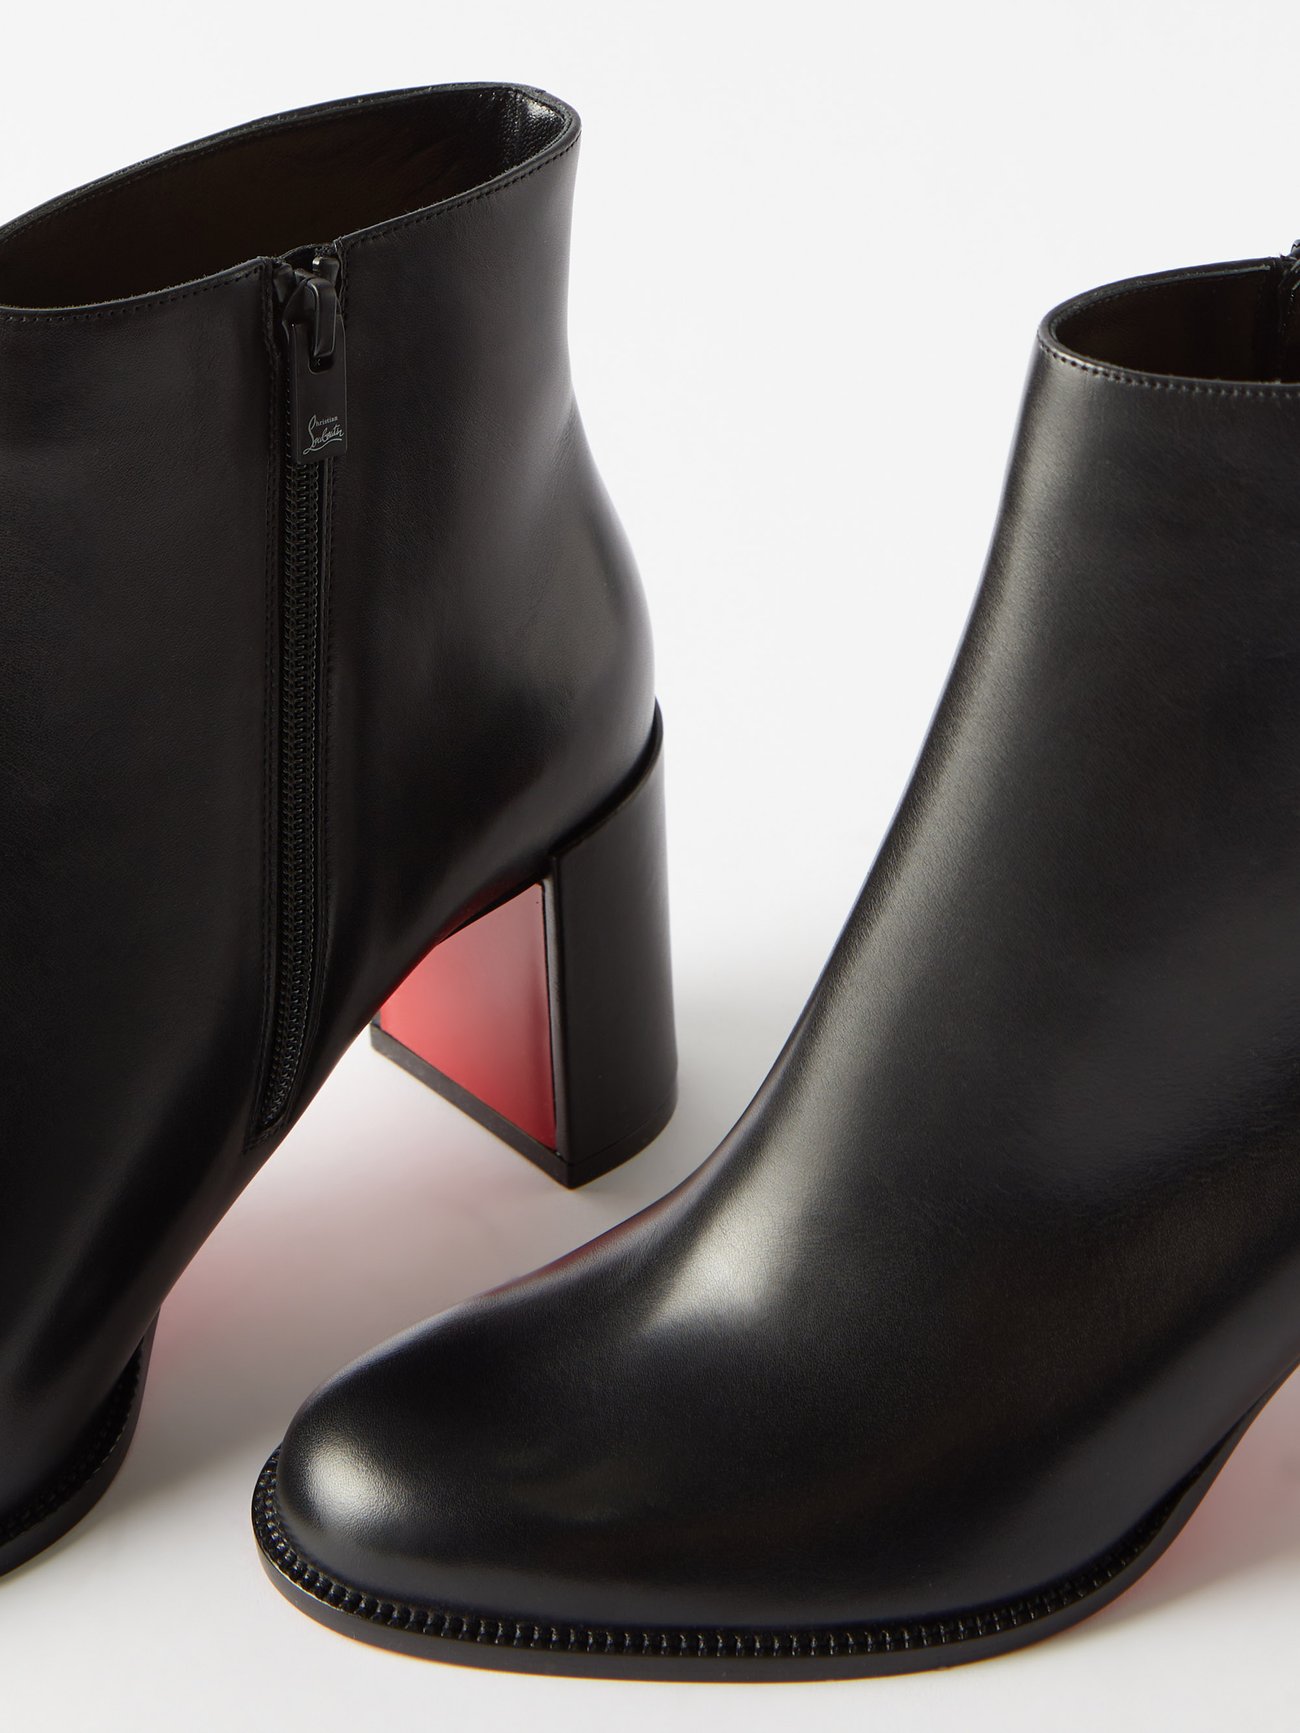 Adoxa - 70 mm Low boots - Calf leather - Black - Christian Louboutin